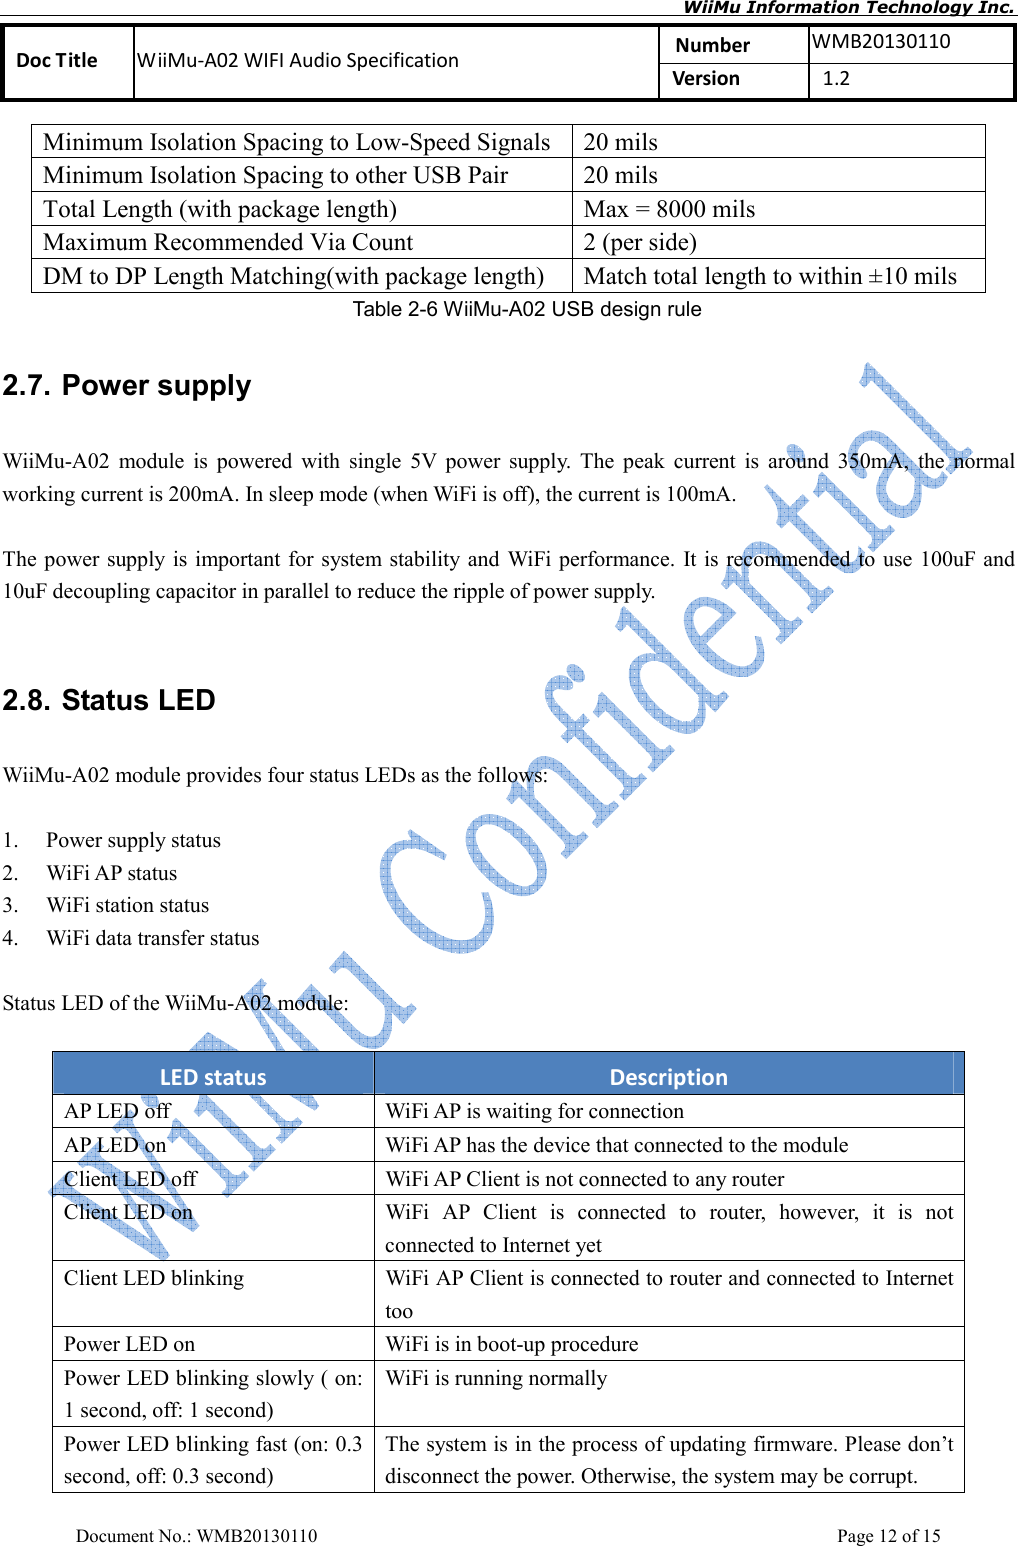       WiiMu Information Technology Inc. Number  WMB20130110 Doc Title  WiiMu-A02 WIFI Audio Specification  Version    1.2  Document No.: WMB20130110    Page 12 of 15 Minimum Isolation Spacing to Low-Speed Signals  20 mils Minimum Isolation Spacing to other USB Pair  20 mils Total Length (with package length)  Max = 8000 mils Maximum Recommended Via Count  2 (per side) DM to DP Length Matching(with package length)  Match total length to within ±10 mils Table 2-6 WiiMu-A02 USB design rule 2.7. Power supply WiiMu-A02  module  is  powered  with  single  5V  power  supply.  The  peak  current  is  around  350mA,  the  normal working current is 200mA. In sleep mode (when WiFi is off), the current is 100mA.      The power supply is important for system stability and  WiFi performance. It is recommended to use 100uF and 10uF decoupling capacitor in parallel to reduce the ripple of power supply.      2.8. Status LED WiiMu-A02 module provides four status LEDs as the follows:    1. Power supply status 2. WiFi AP status 3. WiFi station status 4. WiFi data transfer status  Status LED of the WiiMu-A02 module:  LED status  Description AP LED off  WiFi AP is waiting for connection AP LED on    WiFi AP has the device that connected to the module Client LED off  WiFi AP Client is not connected to any router Client LED on  WiFi  AP  Client  is  connected  to  router,  however,  it  is  not connected to Internet yet   Client LED blinking  WiFi AP Client is connected to router and connected to Internet too Power LED on  WiFi is in boot-up procedure Power LED blinking slowly ( on: 1 second, off: 1 second) WiFi is running normally   Power LED blinking fast (on: 0.3 second, off: 0.3 second) The system is in the process of updating firmware. Please don’t disconnect the power. Otherwise, the system may be corrupt.        